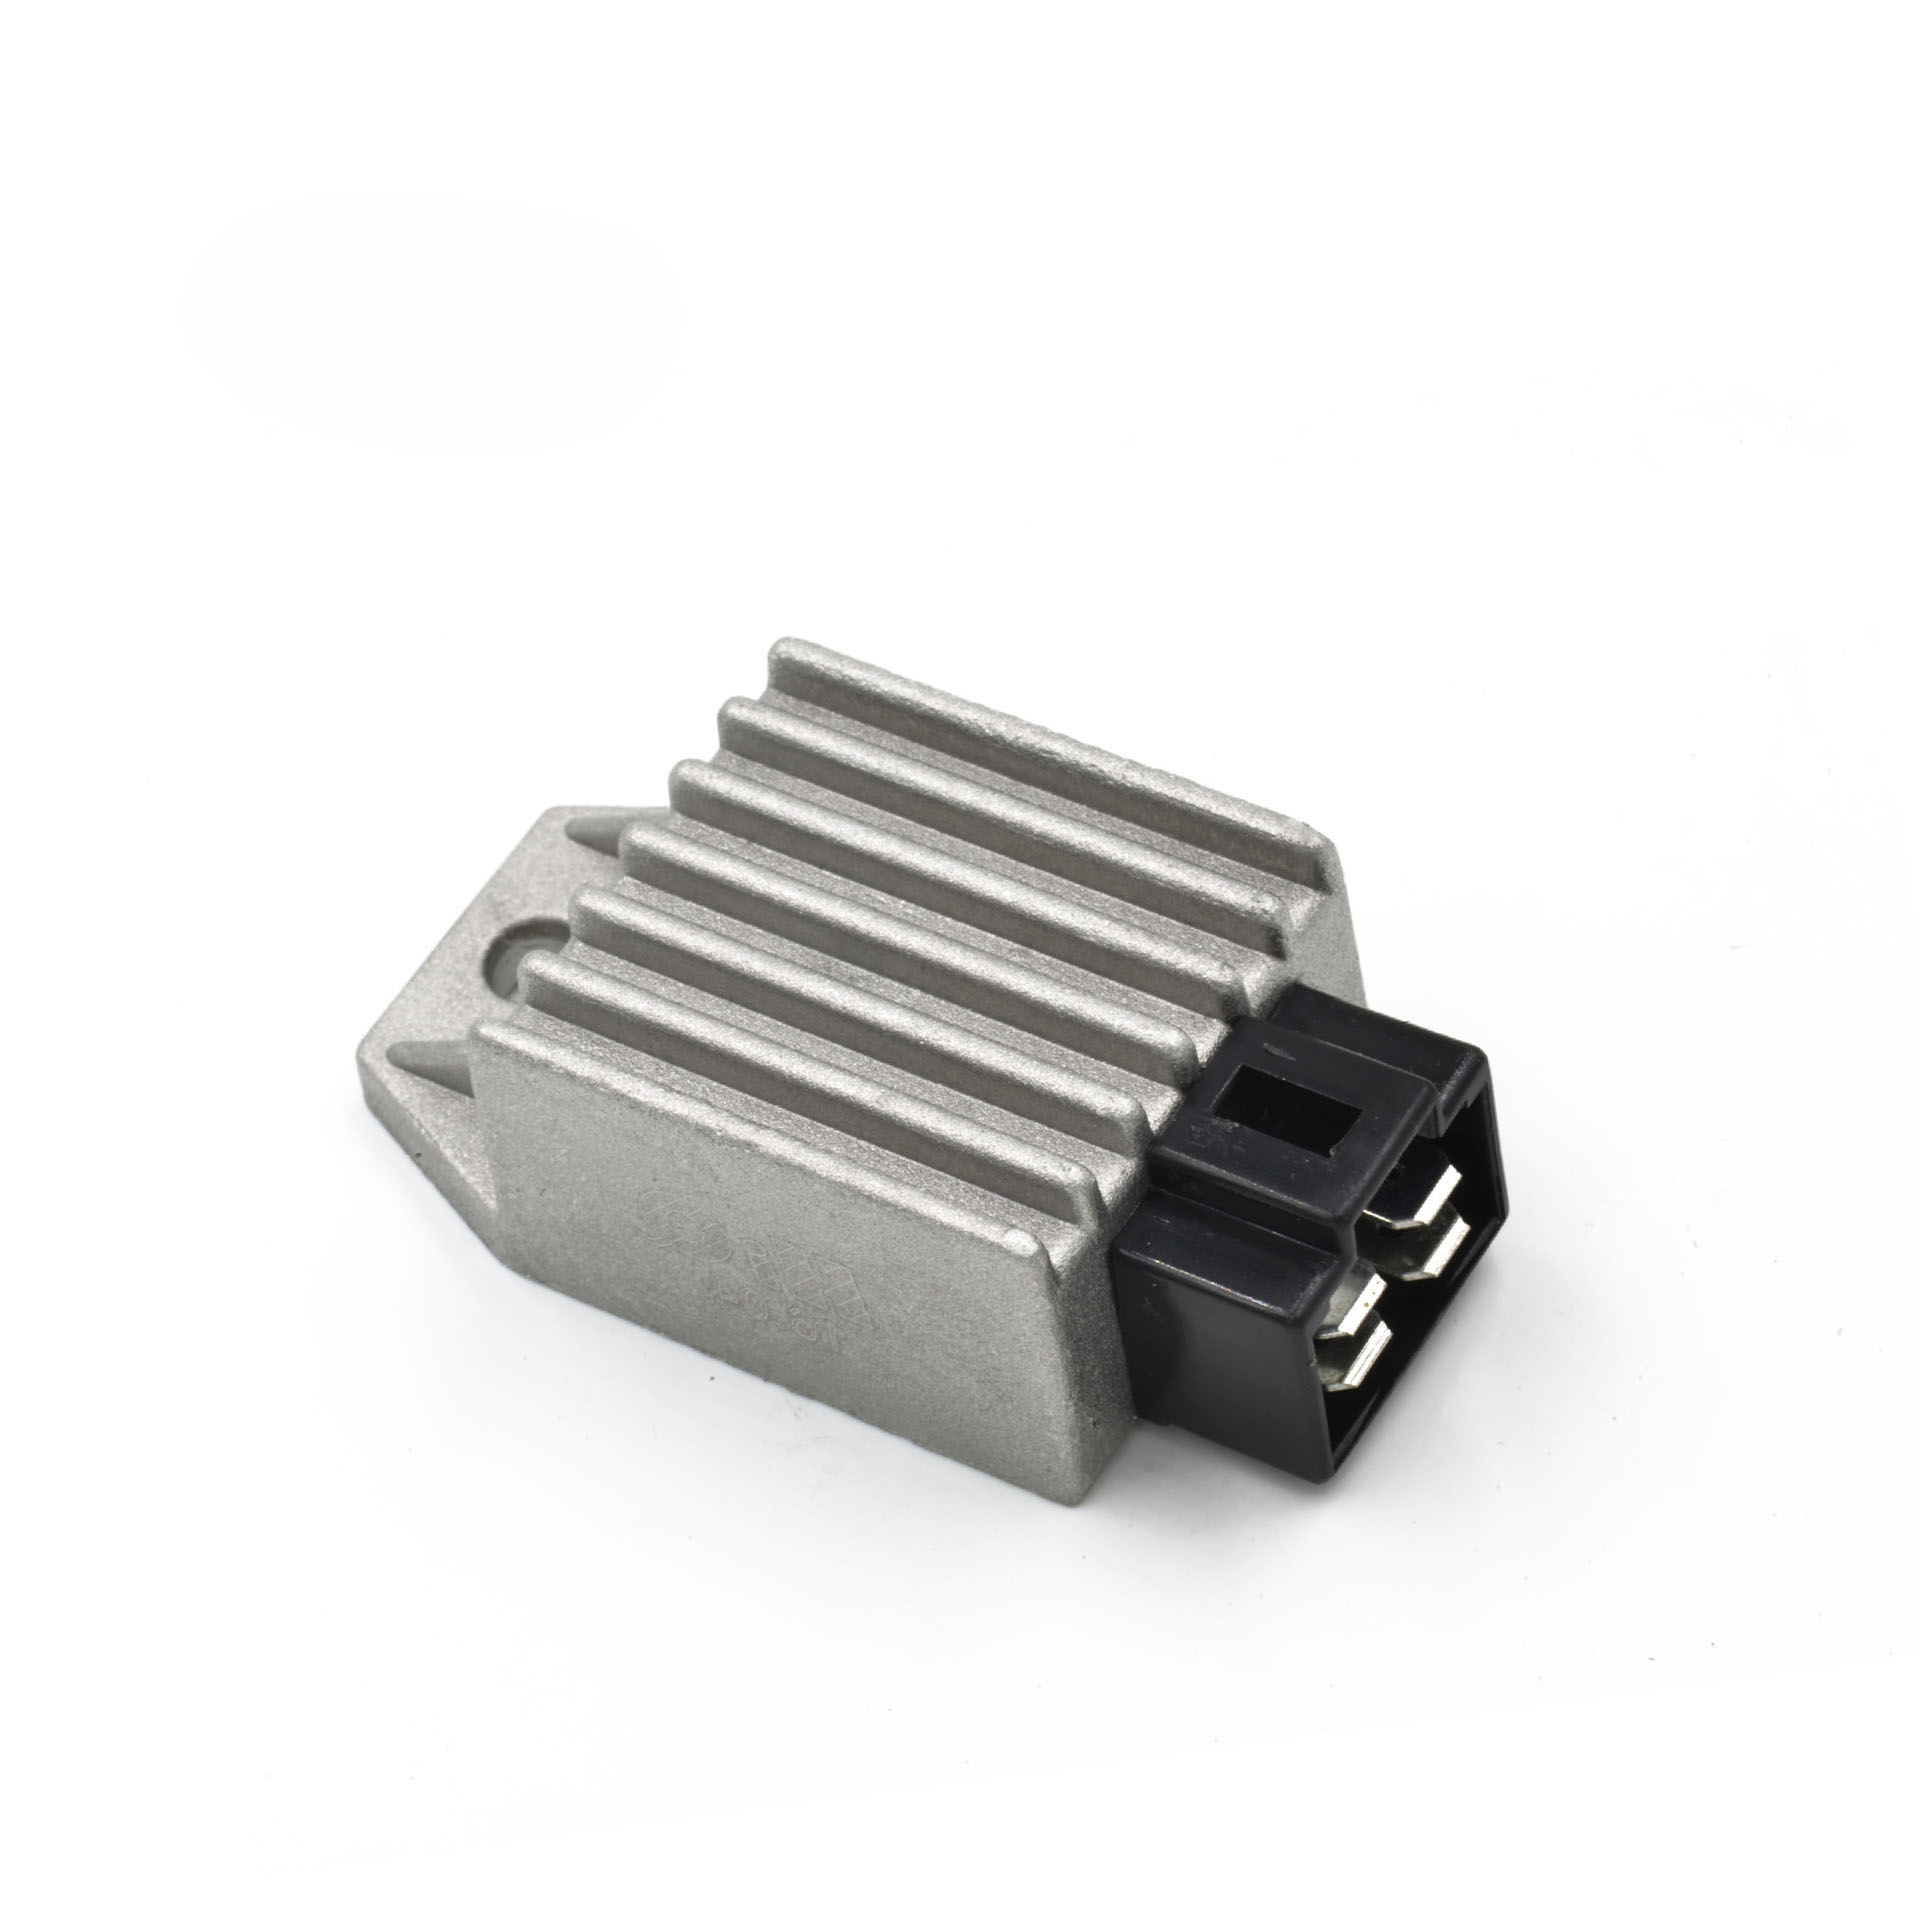 Motorcycle Voltage Regulator Rectifier 12V 4Pin fit for Buggie with GY6 50cc 125cc 150cc Moped Scooter ATV Gokarts